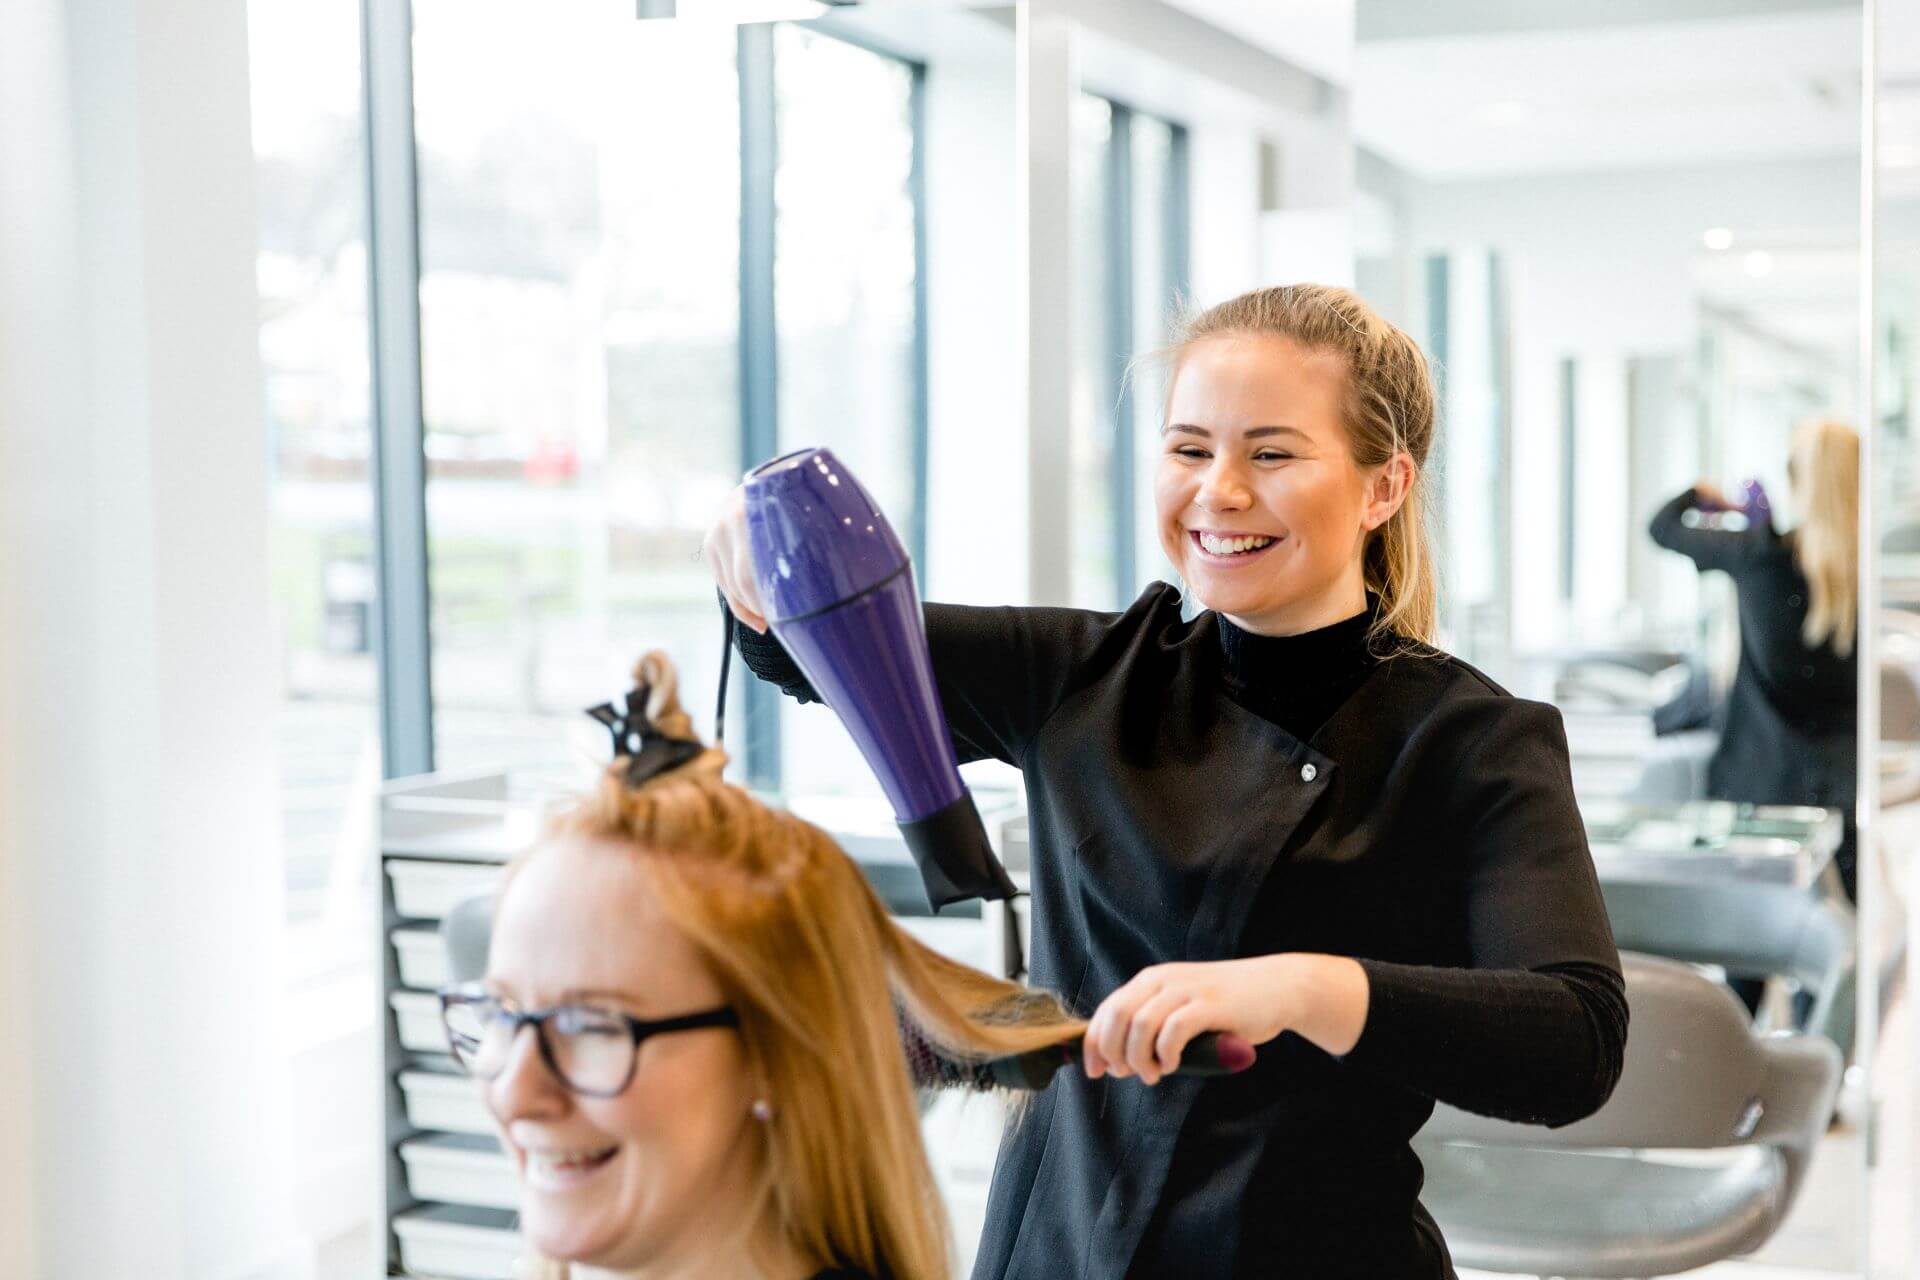 http://Hairdressing%20students%20drying%20a%20customers%20hair